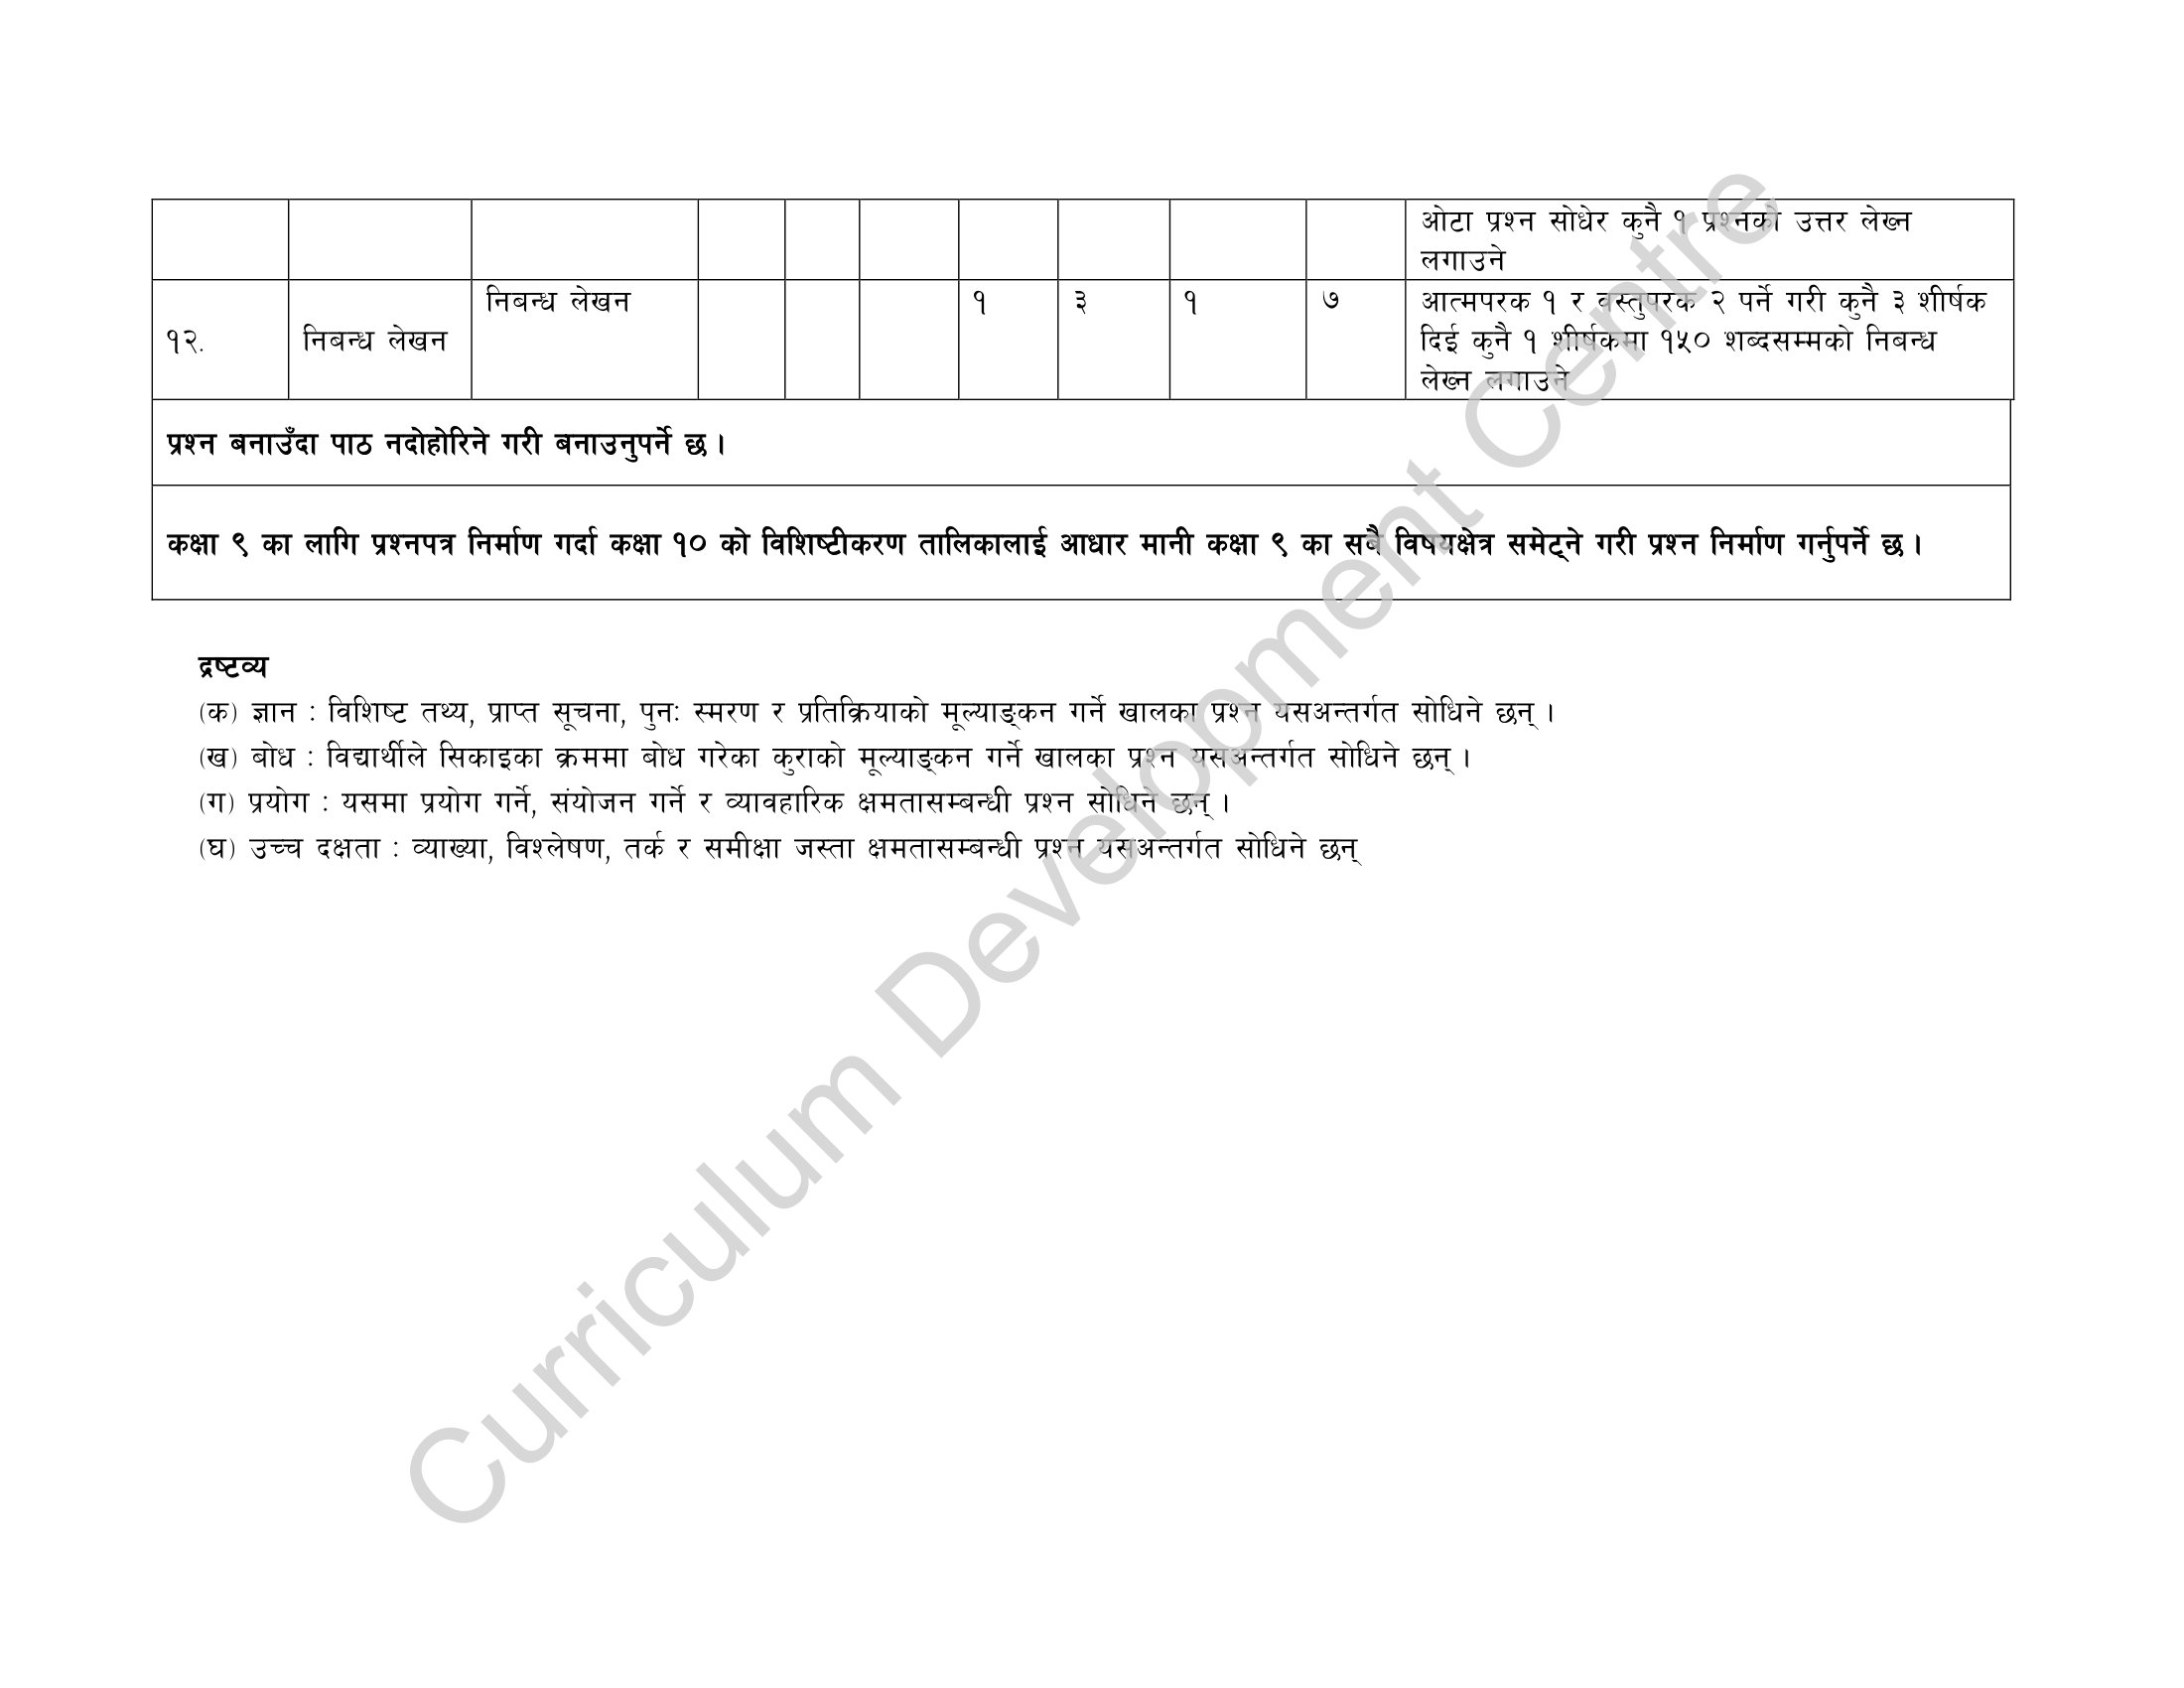 Class 10 SEE Nepali Specification Grid 2080